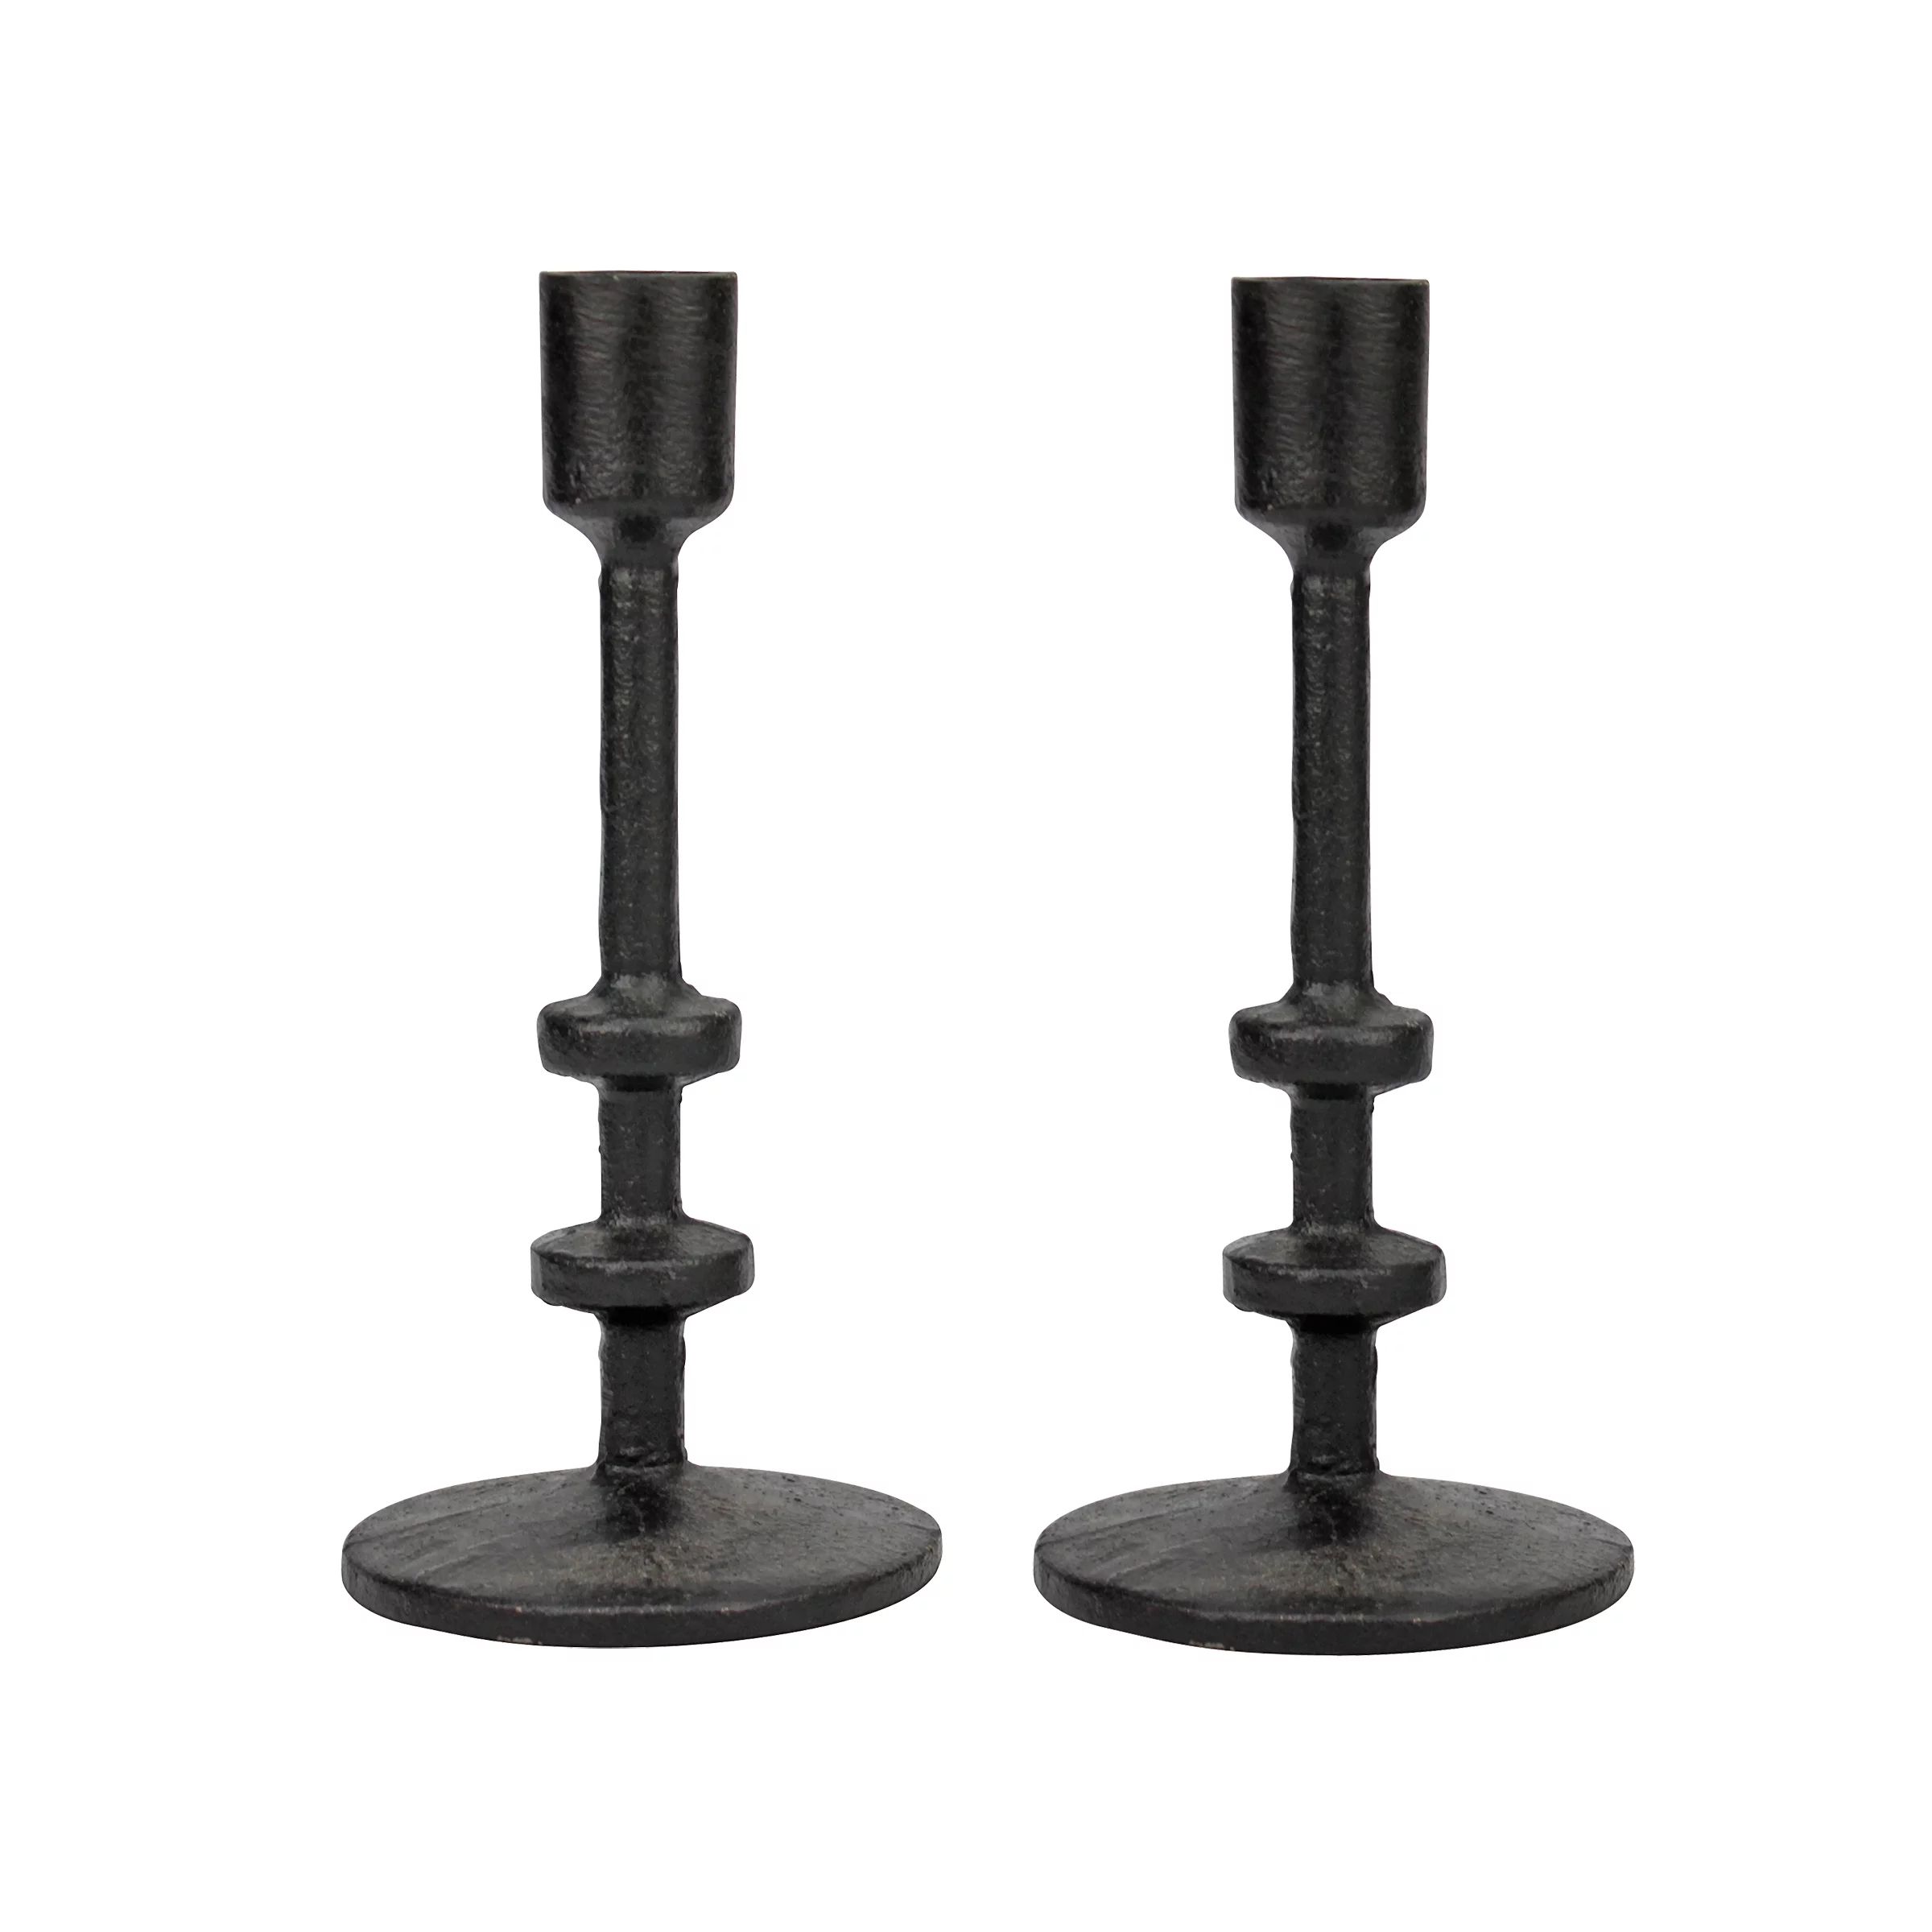 Stonebriar Table Top 7" Traditional Cast Iron Candlestick Holder Set, Black, 2 Pieces | Walmart (US)